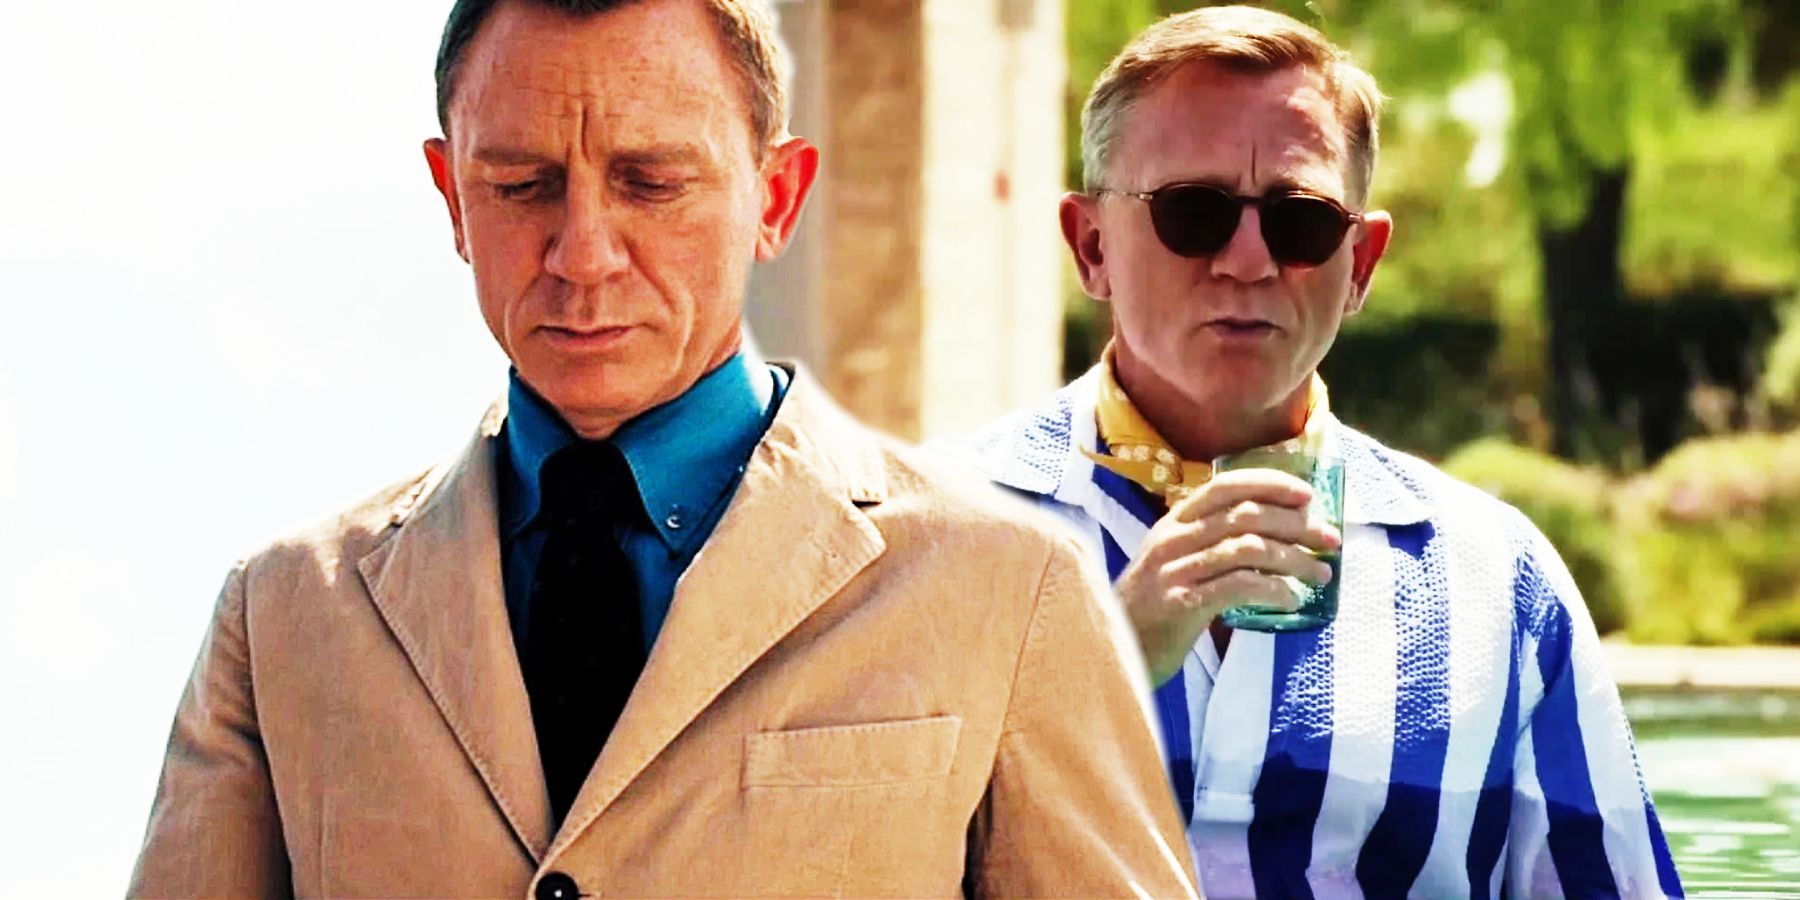 Daniel Craig as James Bond in No Time to Die and as Benoit Blanc in Glass Onion